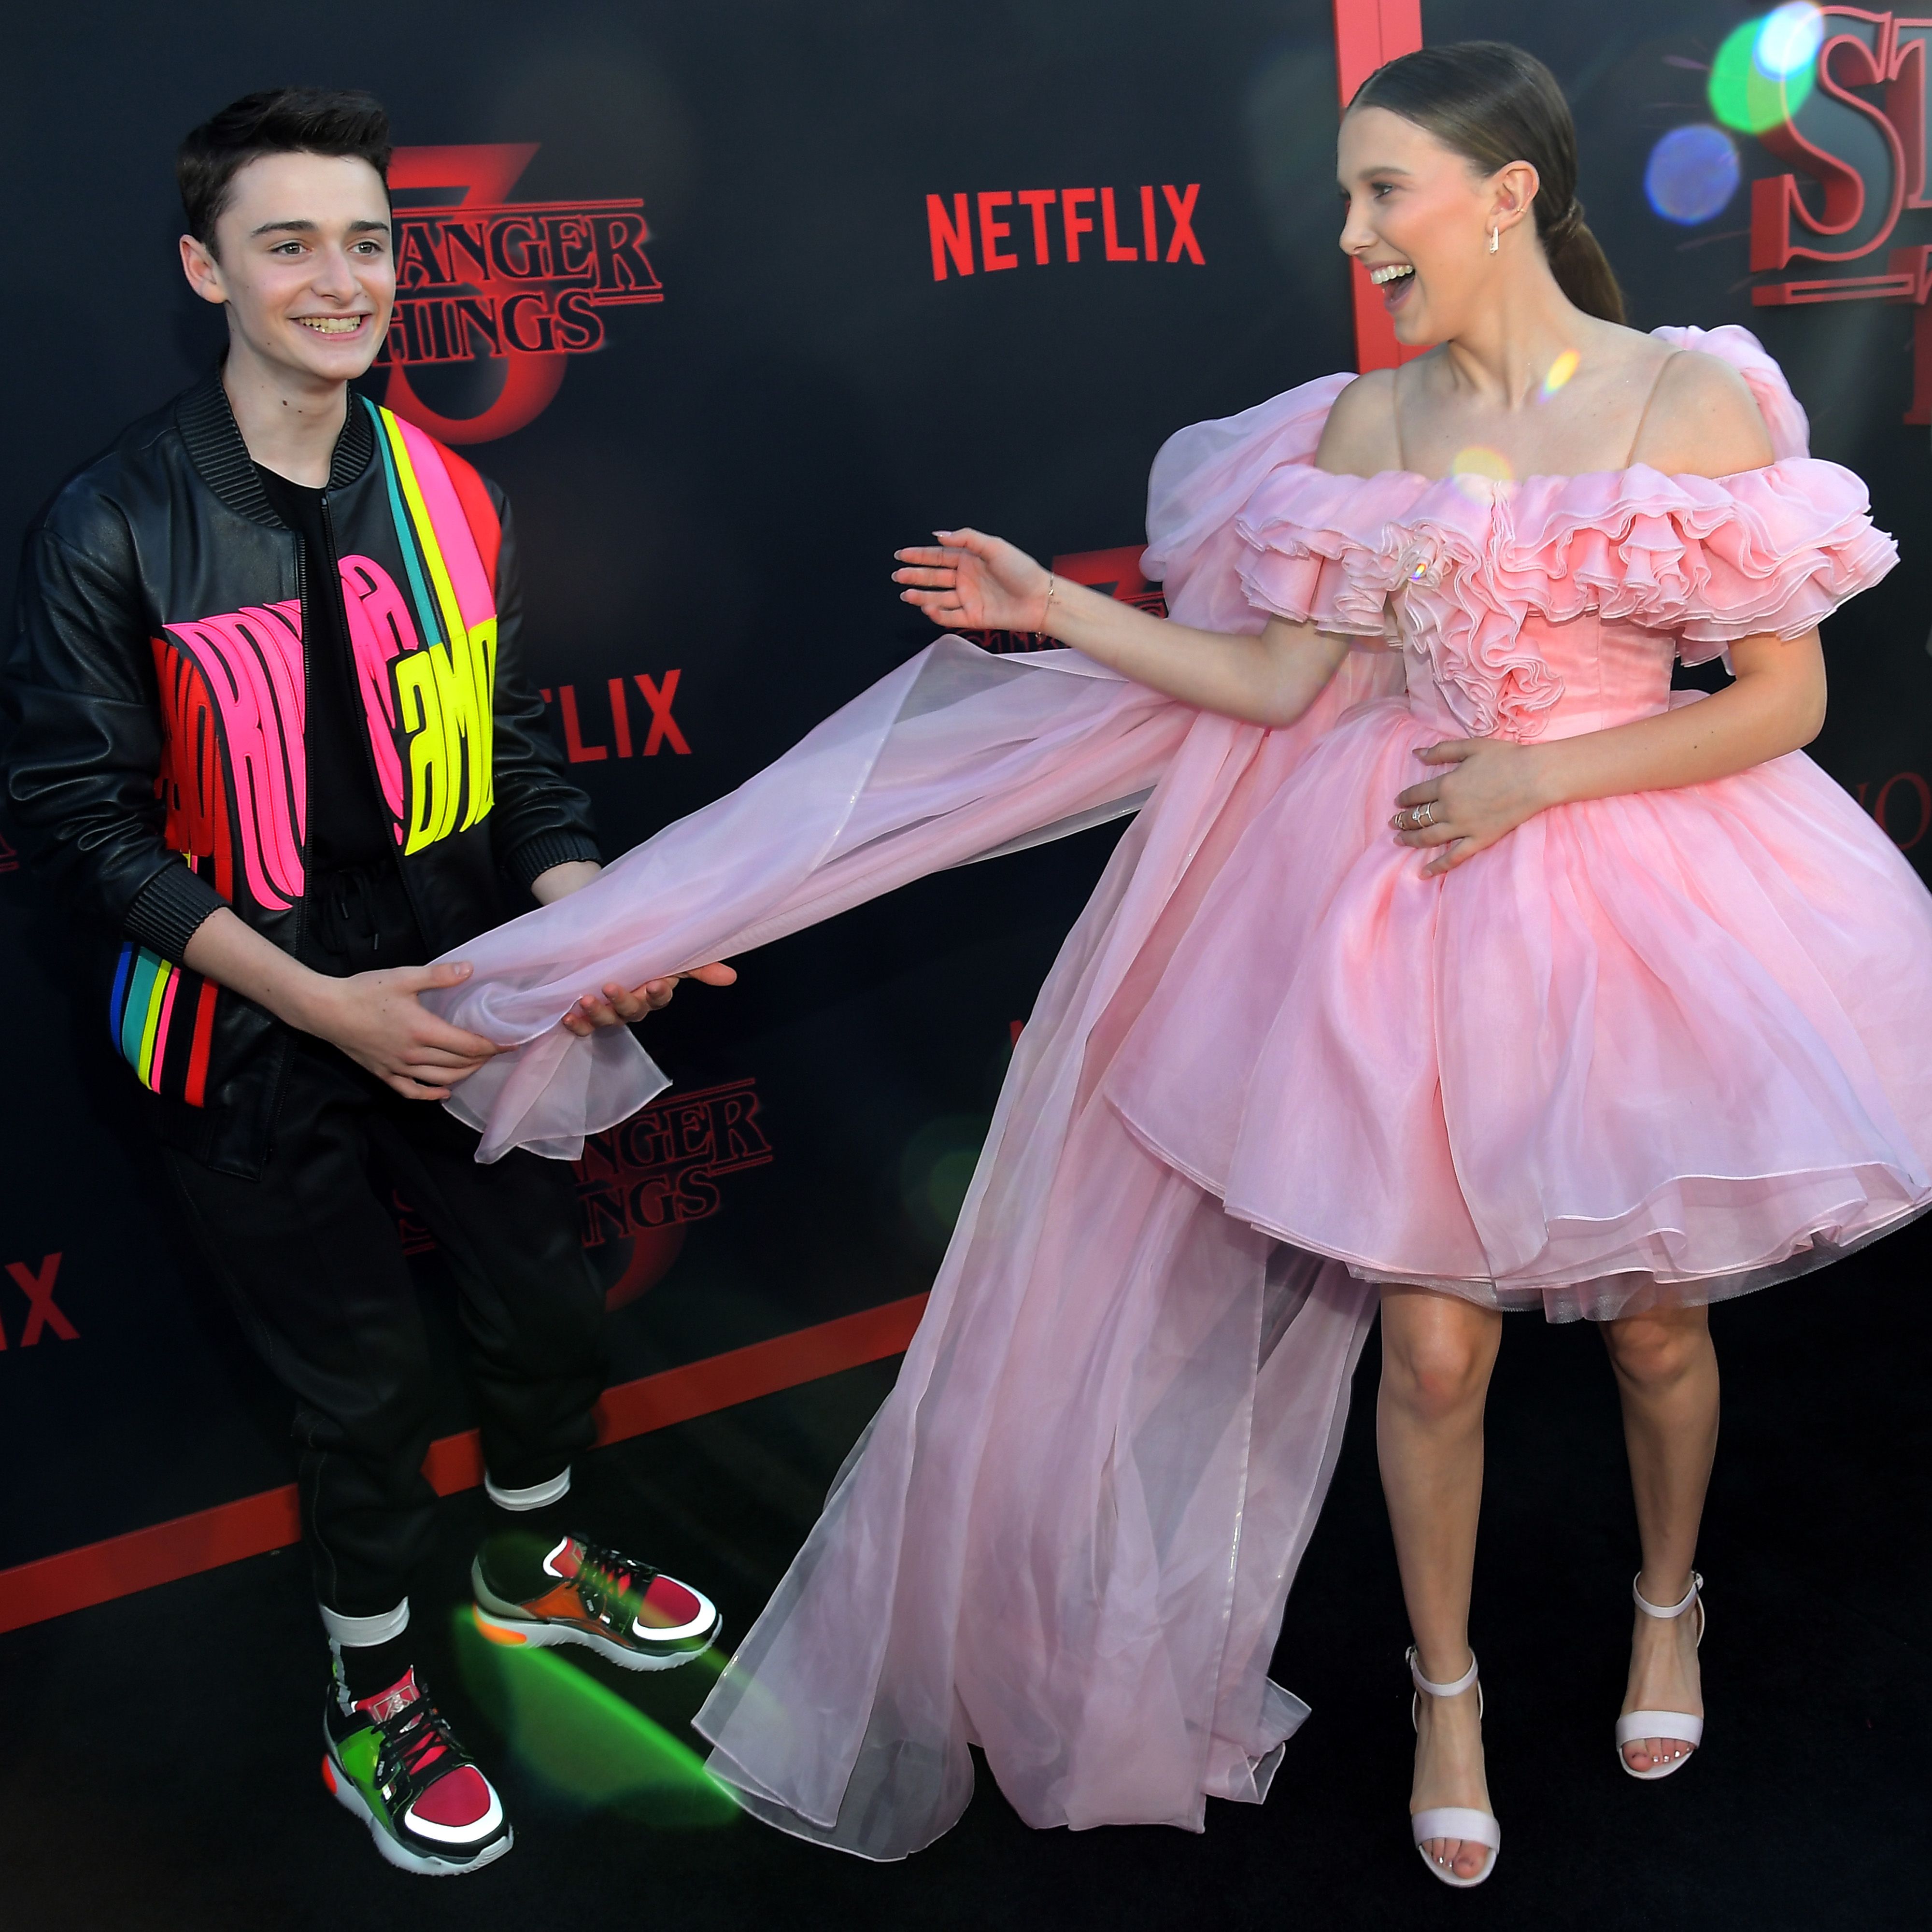 Photos That Show Why Millie Bobby Brown Is Becoming a Fashion Icon